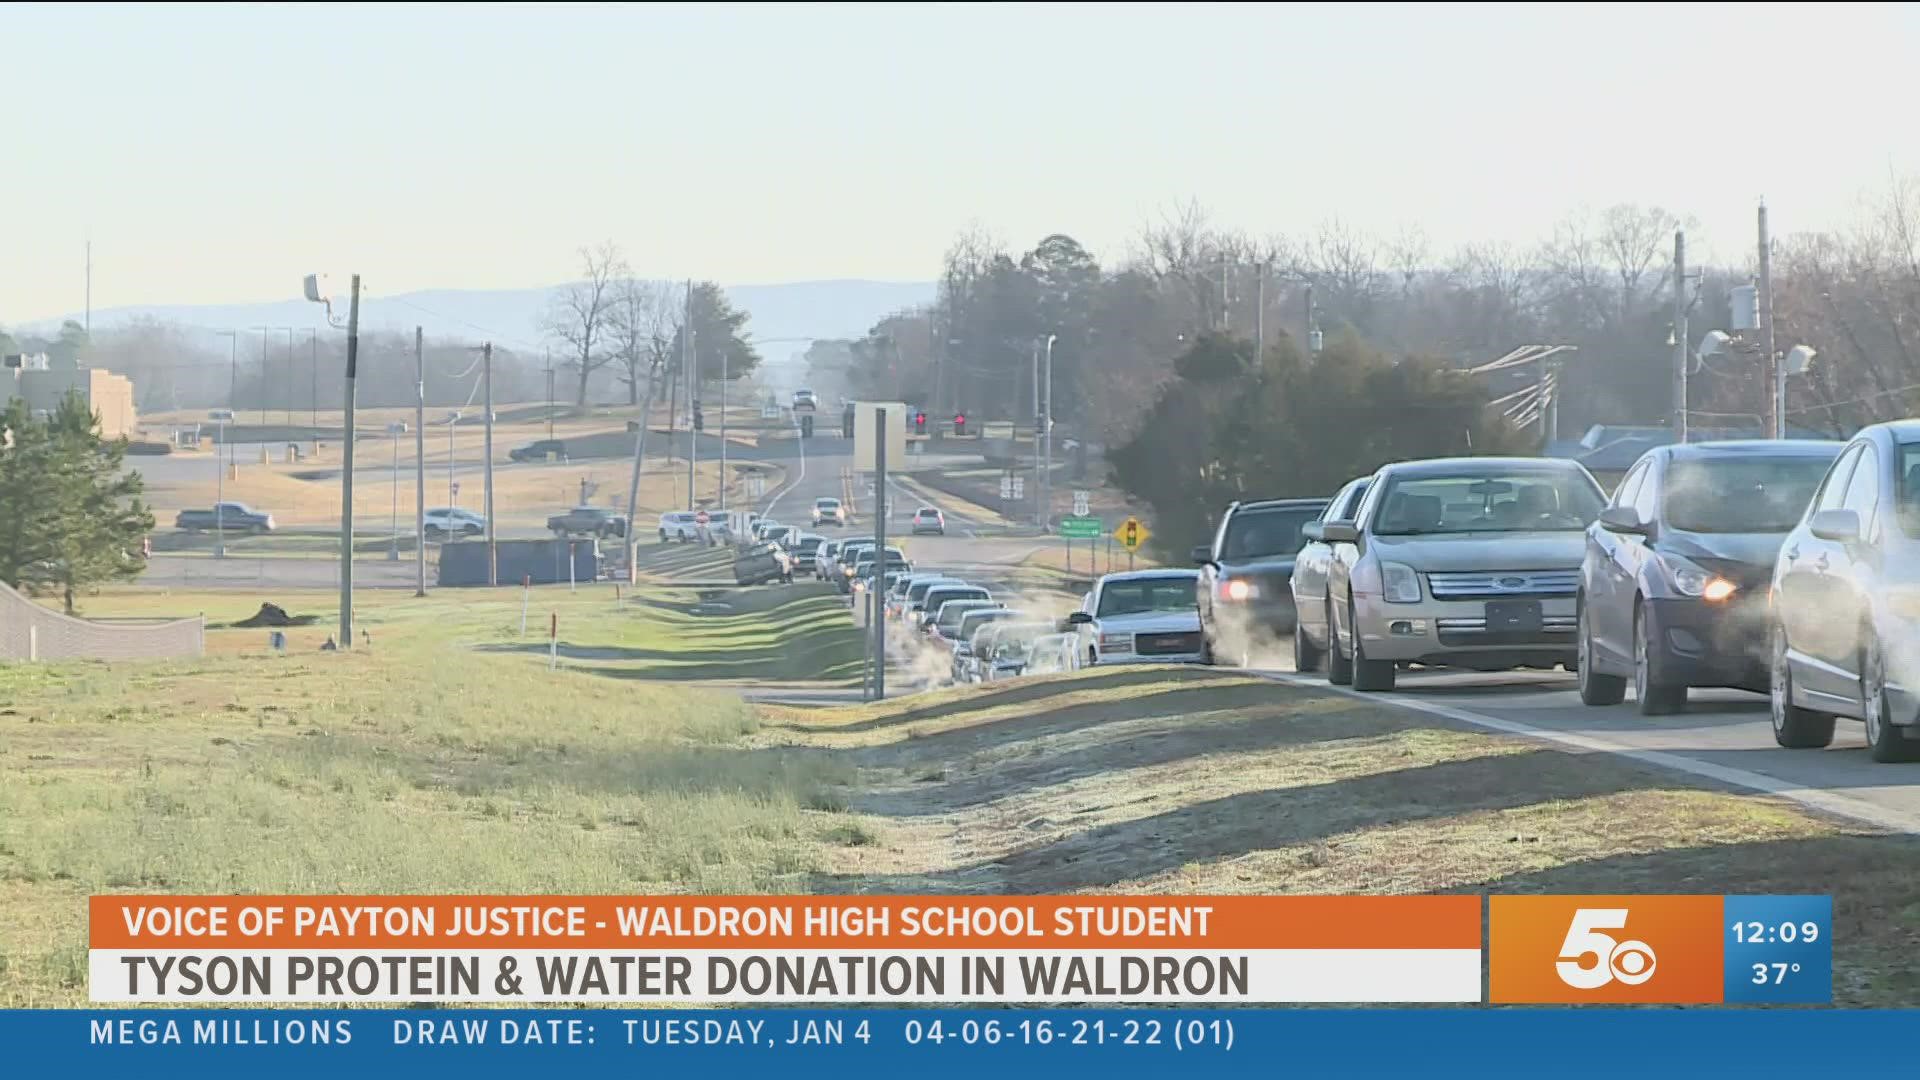 Schools in Waldron and some businesses have been closed due to a lack of water pressure for restrooms and kitchen operations. A boil order is also in effect.